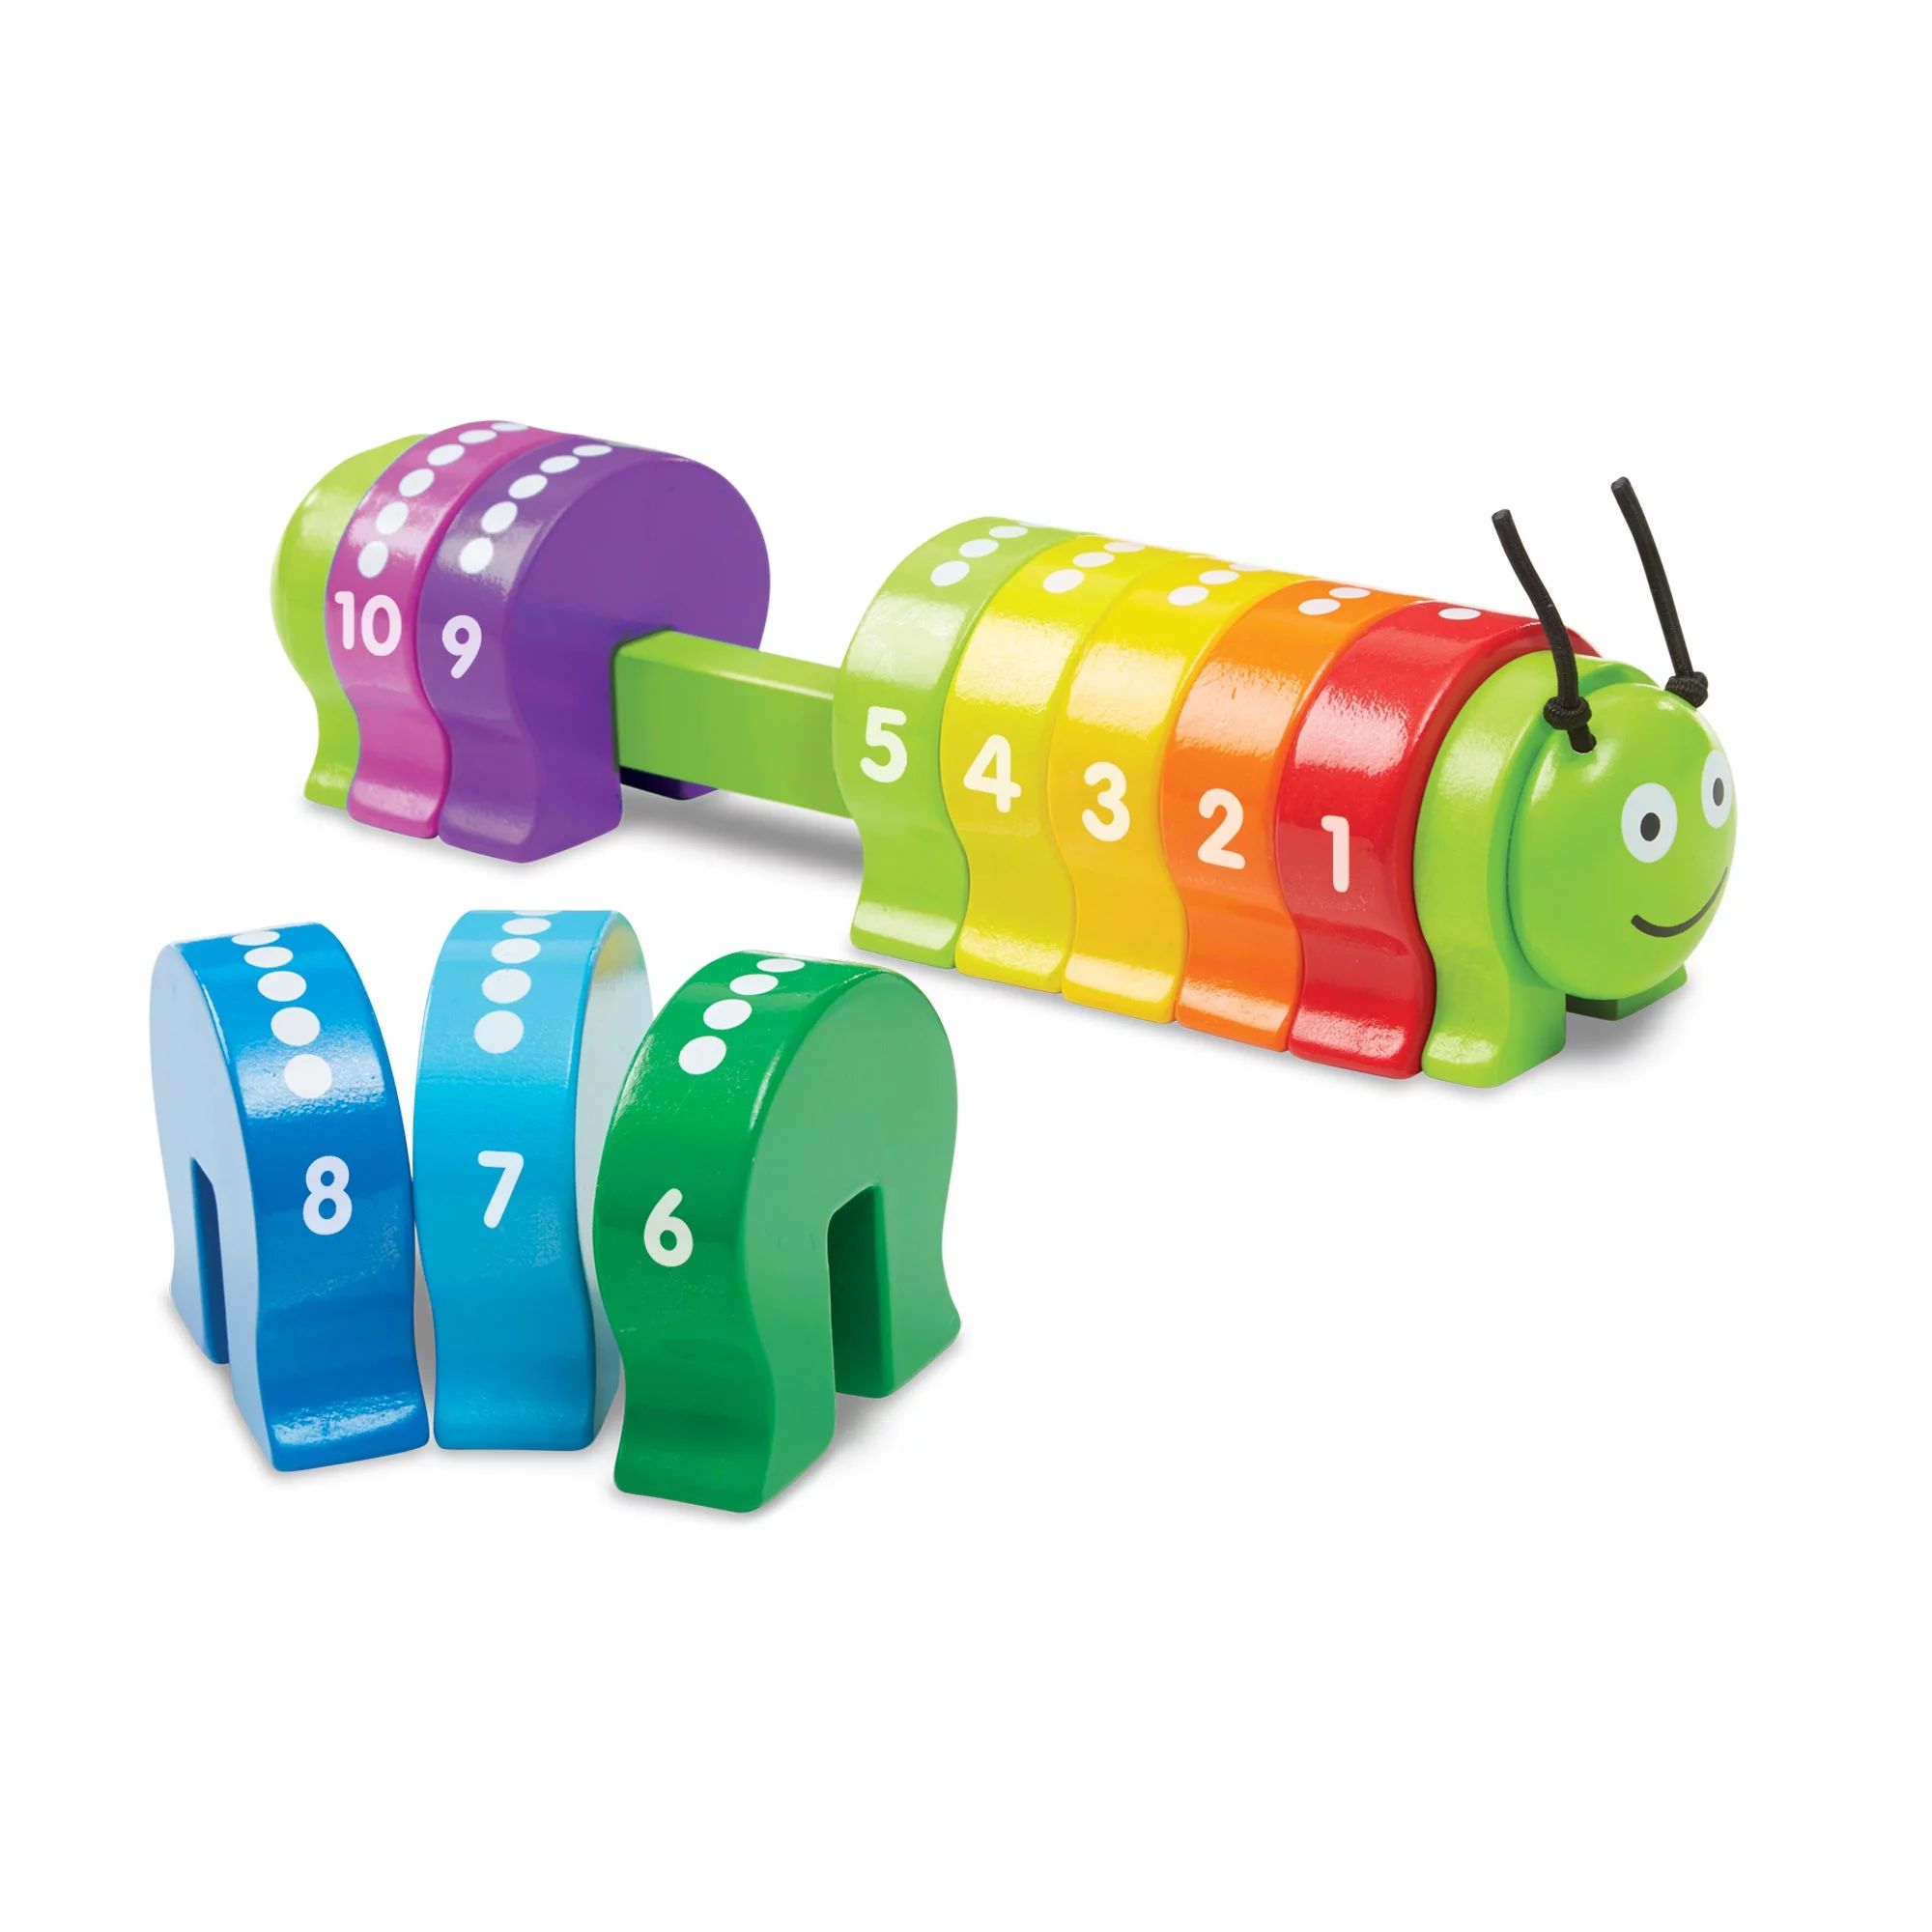 Melissa & Doug Counting Caterpillar - Classic Wooden Toy With 10 Colorful Numbered Segments | Walmart (US)